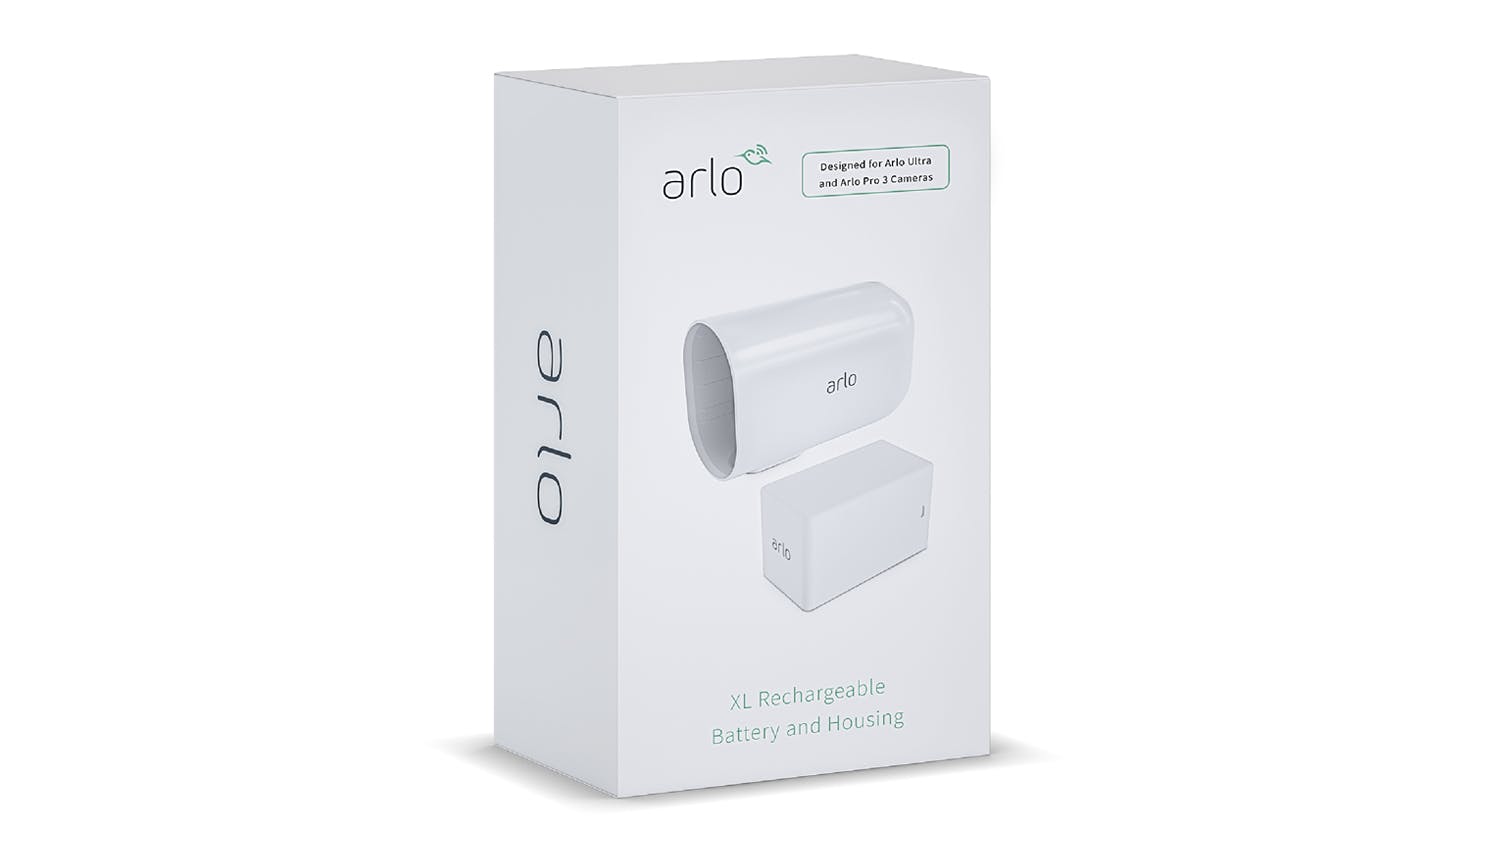 Arlo Ultra and Pro 3 XL Rechargeable Battery and Housing